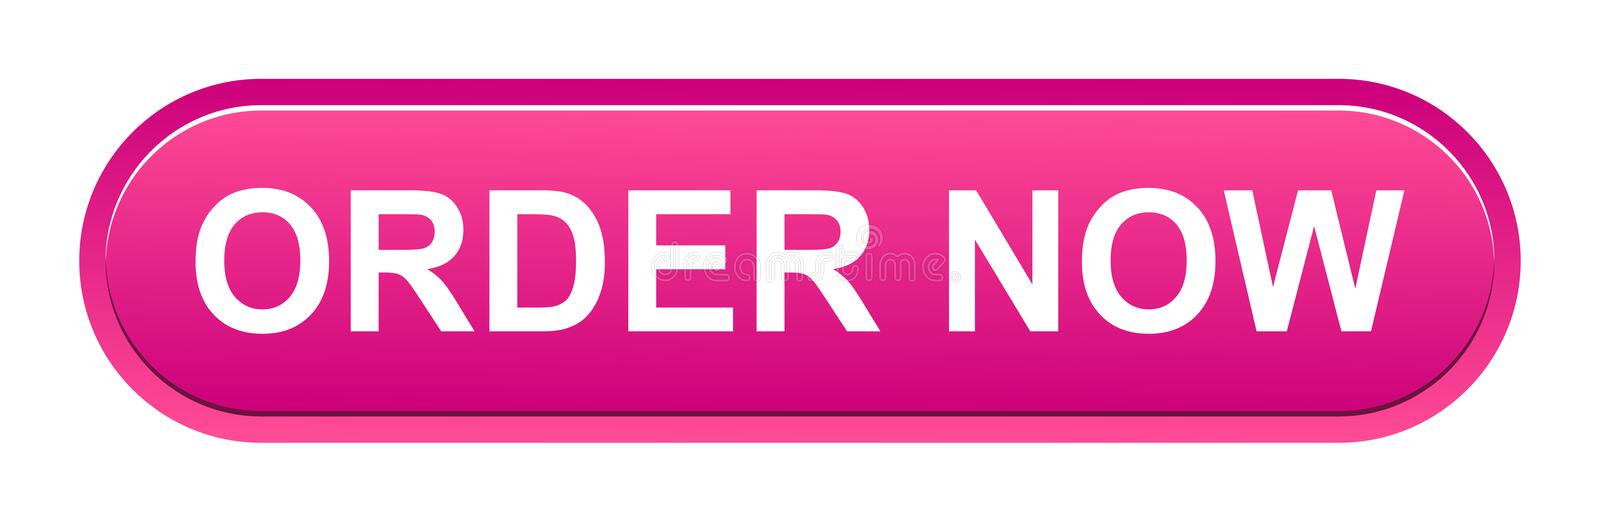 order-now-button-vector-illustration-pink-web-white-background-attached-eps-file-121428404.jpg